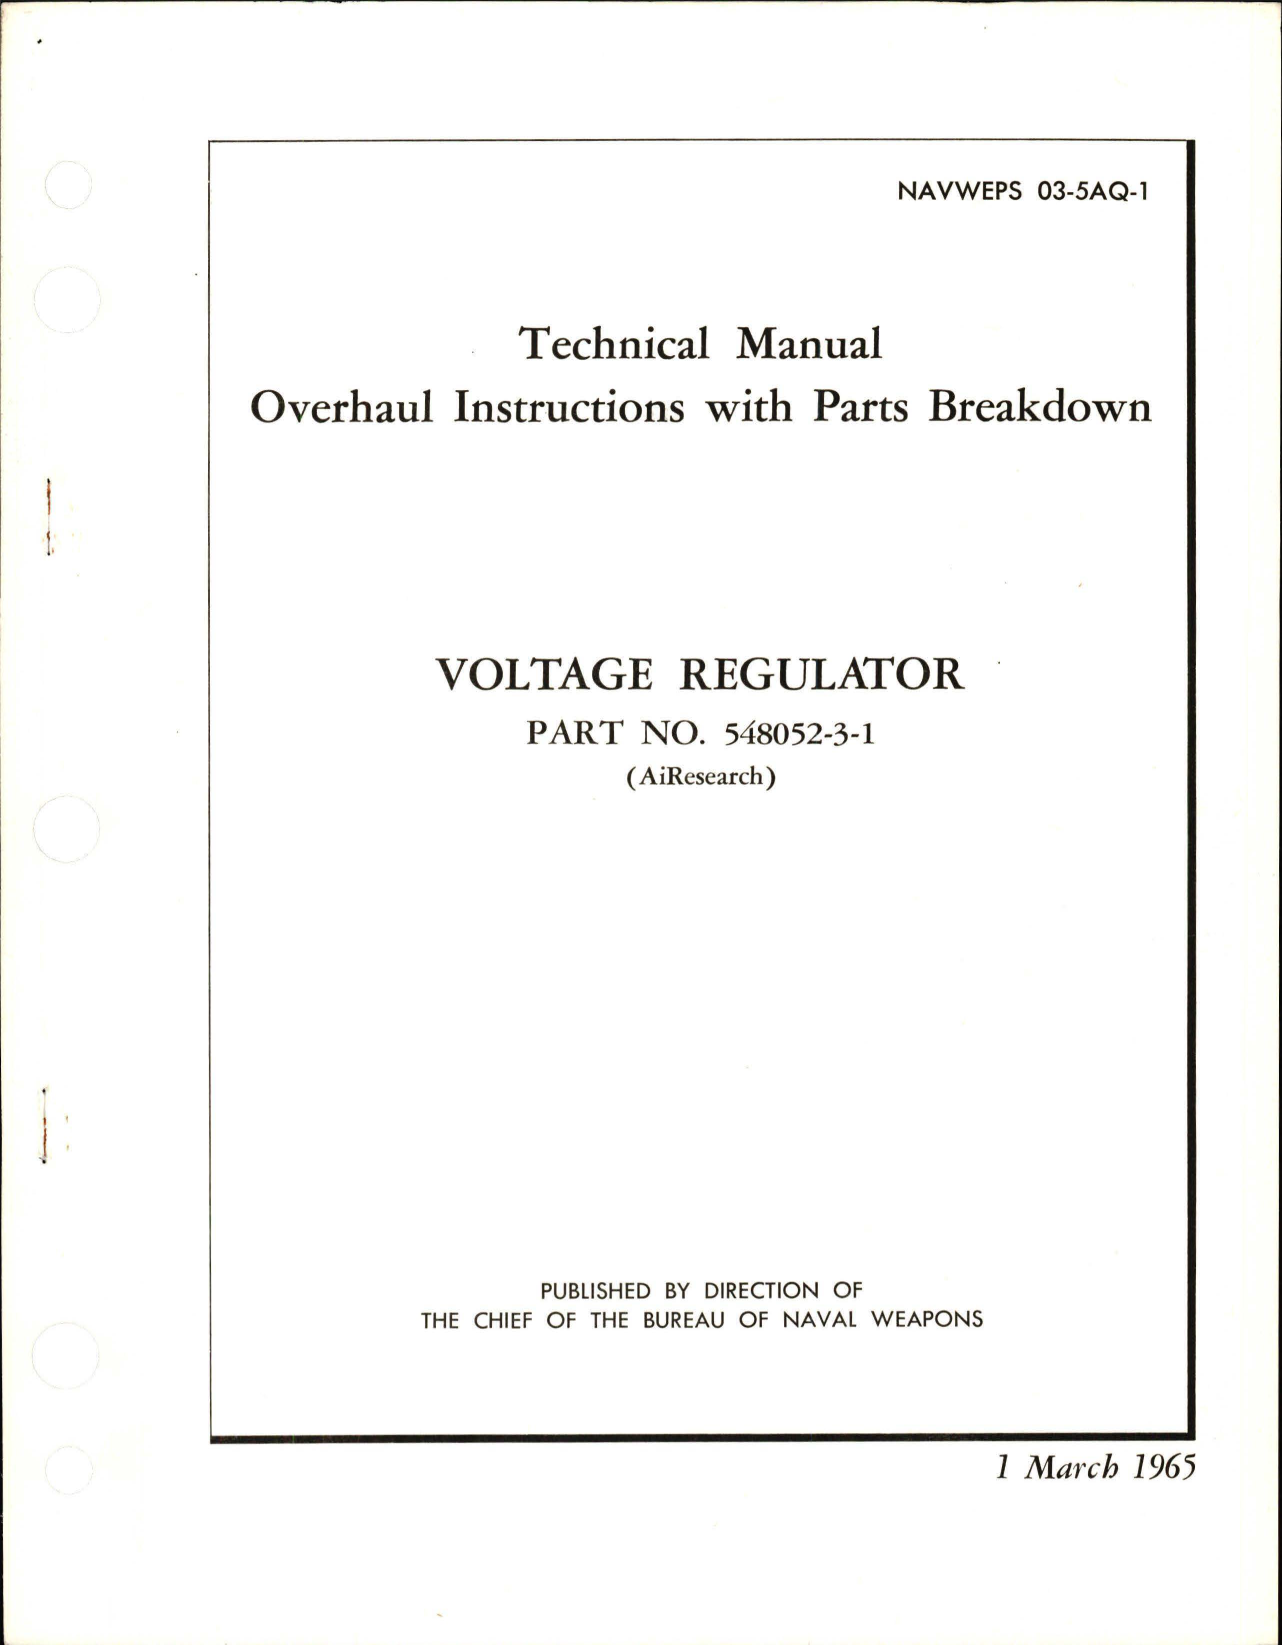 Sample page 1 from AirCorps Library document: Overhaul Instructions with Parts Breakdown for Voltage Regulator - Part 548052-3-1